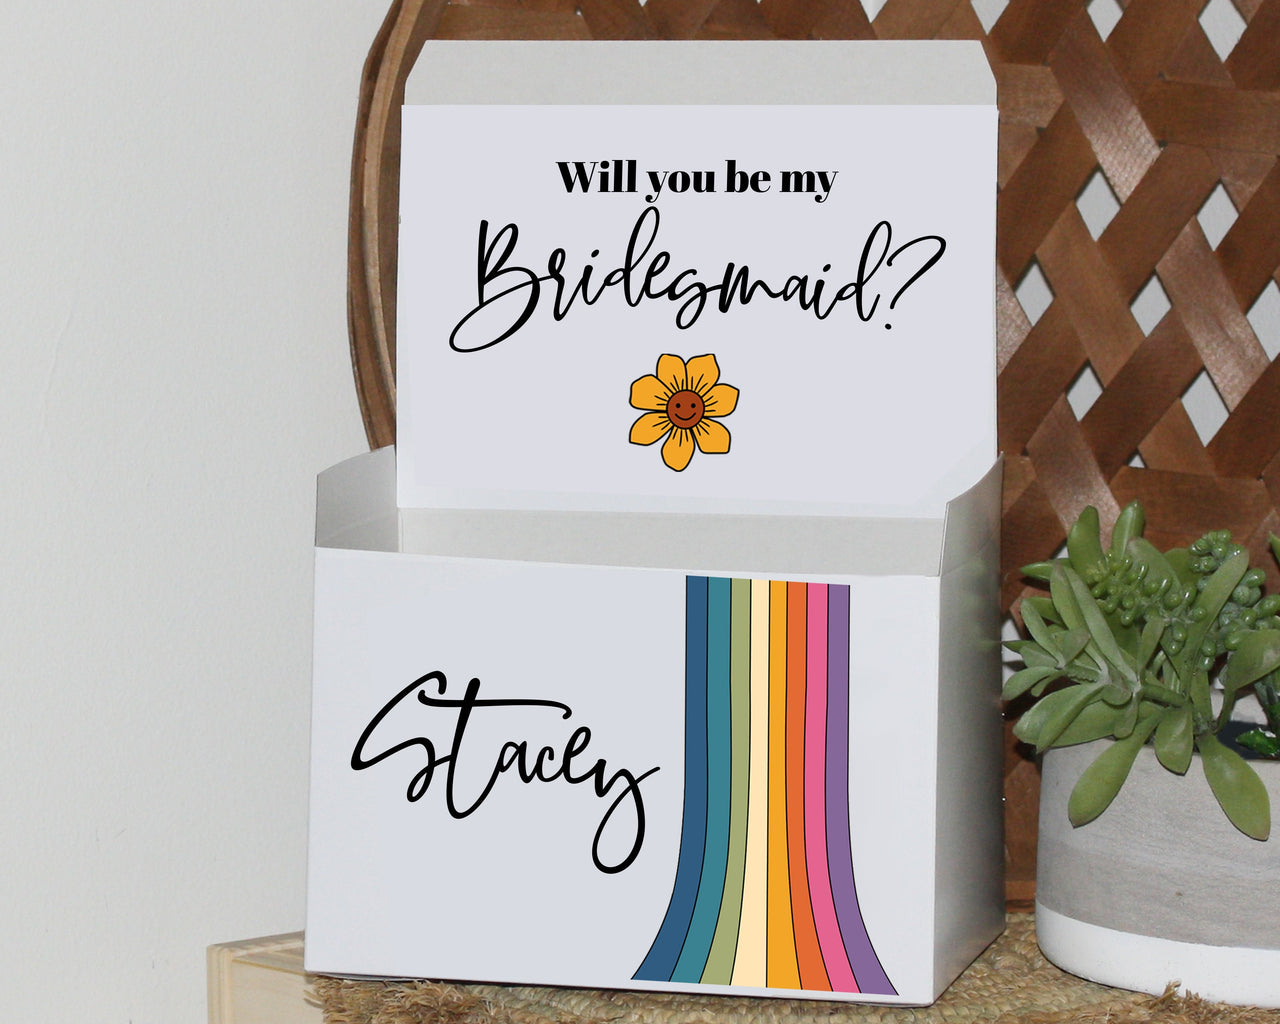 Bridesmaid Proposal Gift Box, Custom Proposal Gift Box with outside and inside art, Empty Gift Box, Greenery Eucalyptus tropical leafy